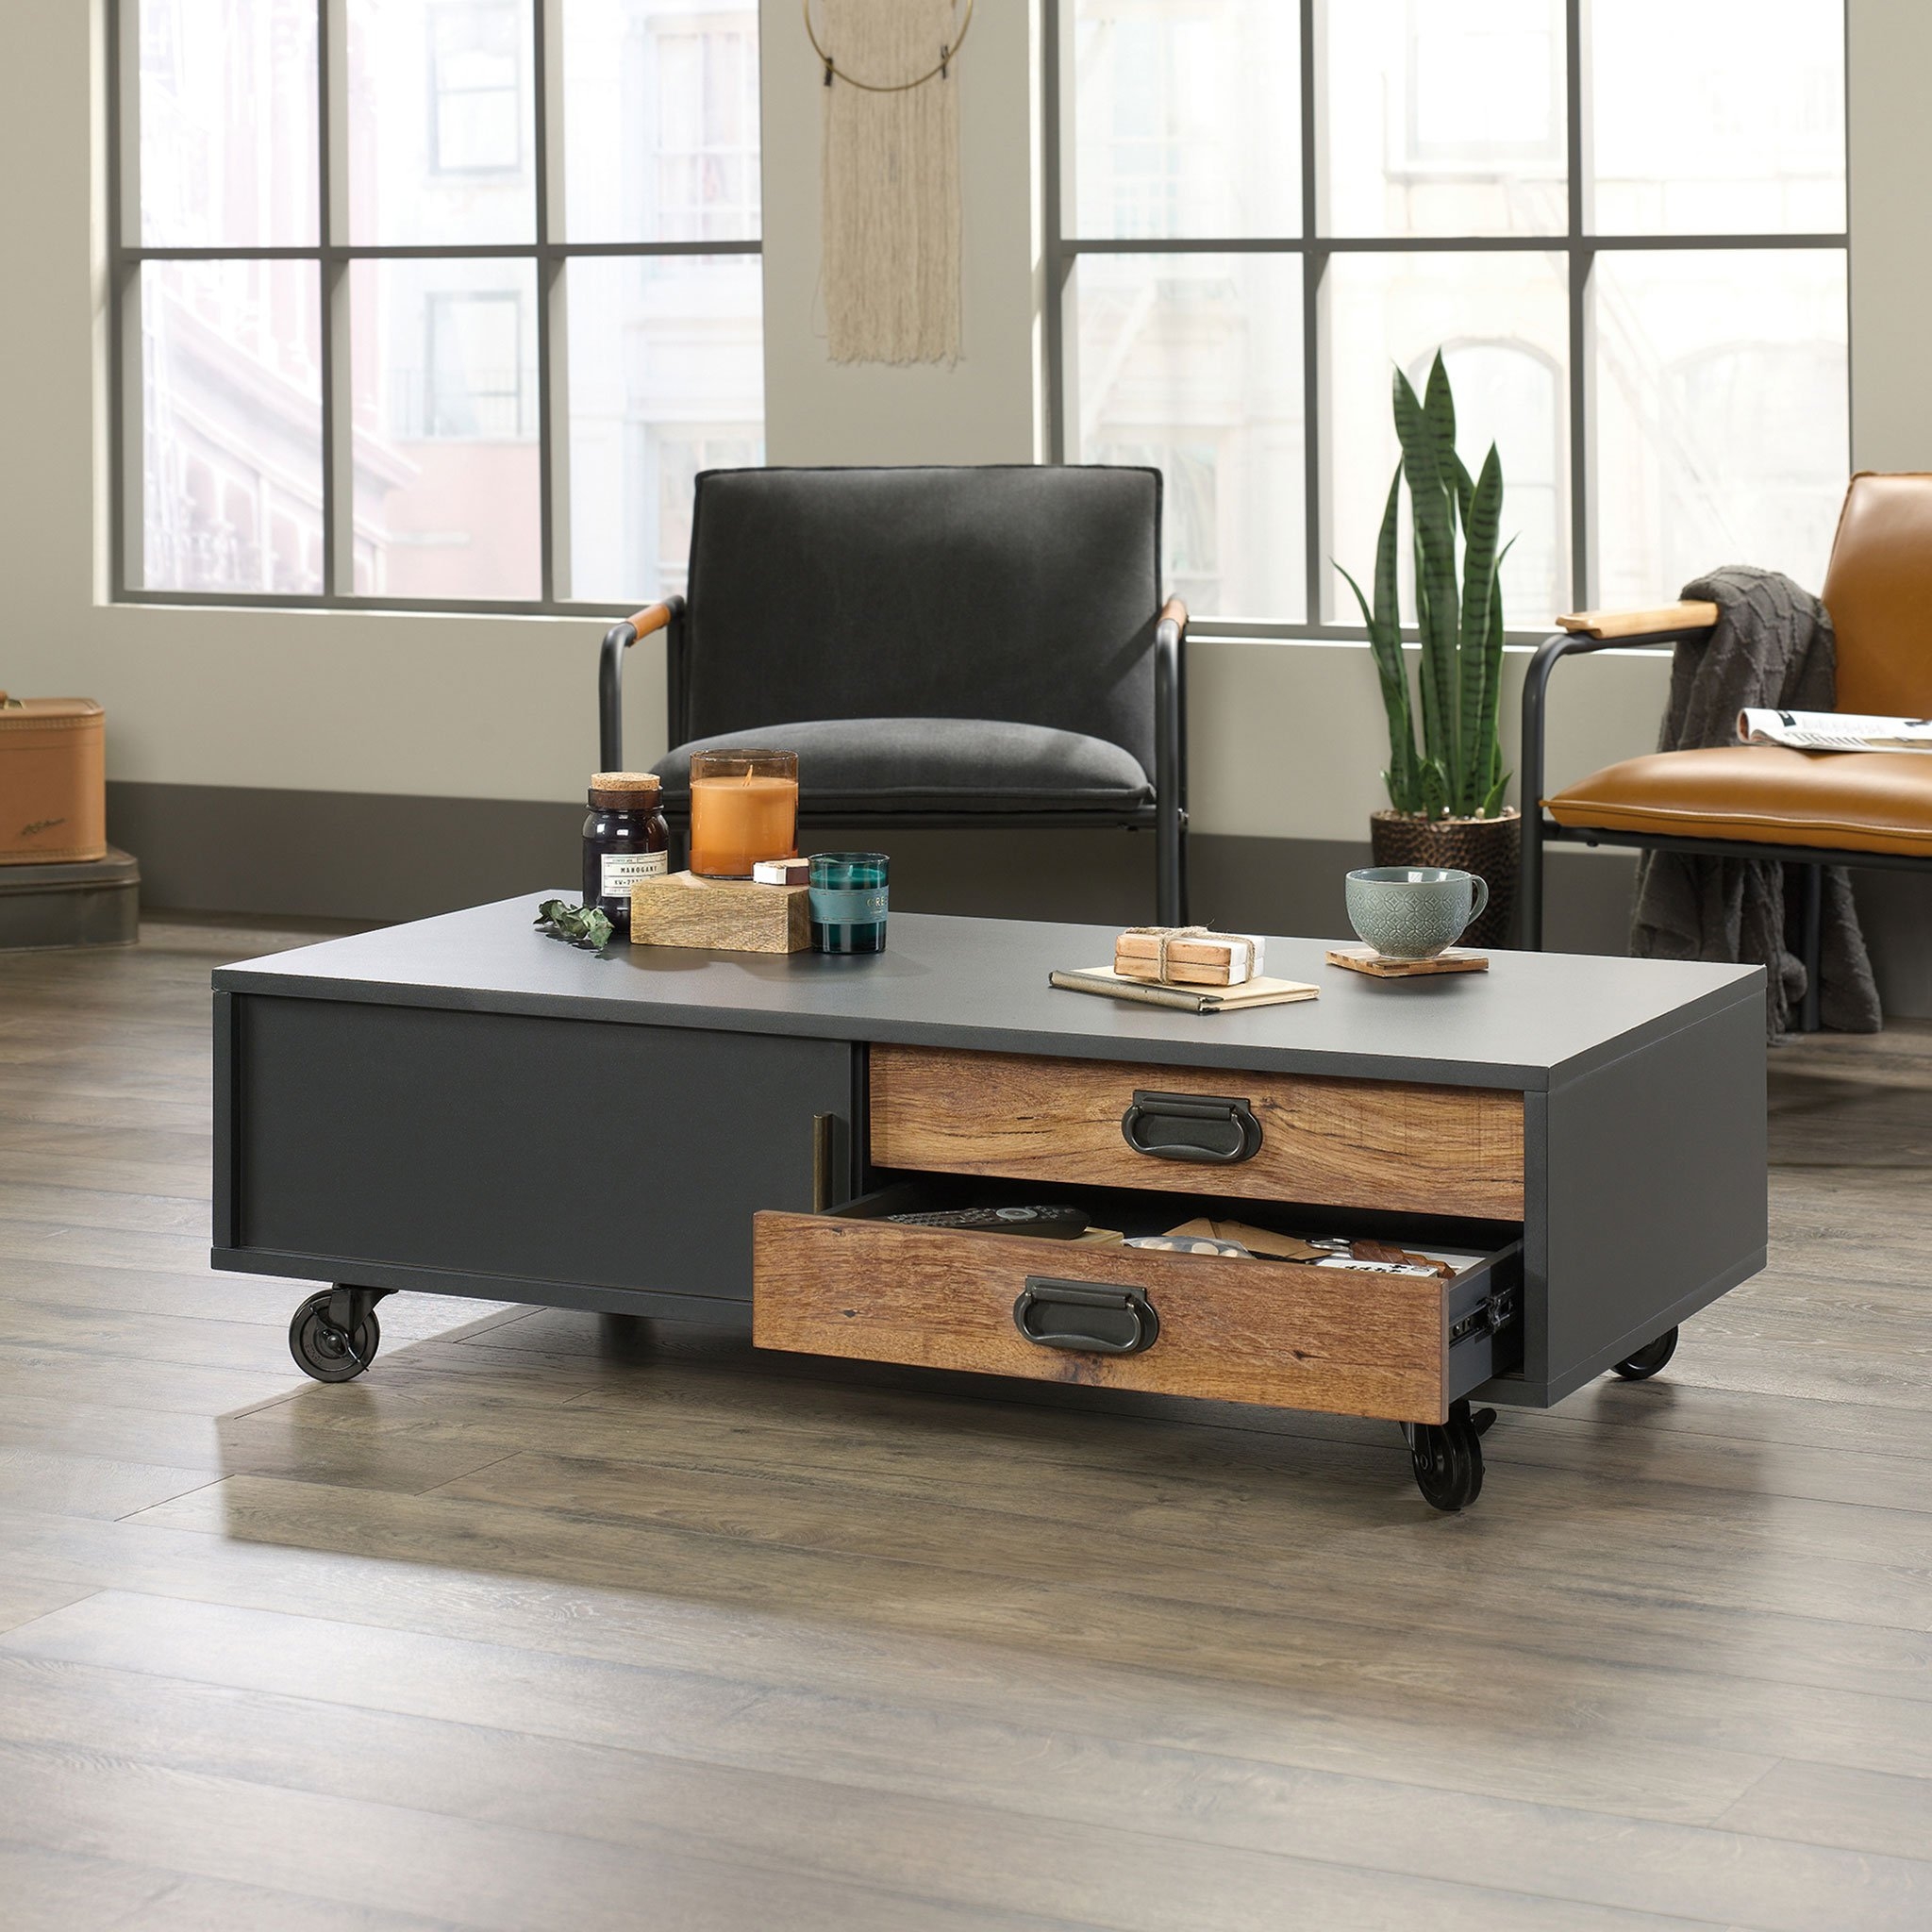 Loehr Wheel Coffee Table with Storage